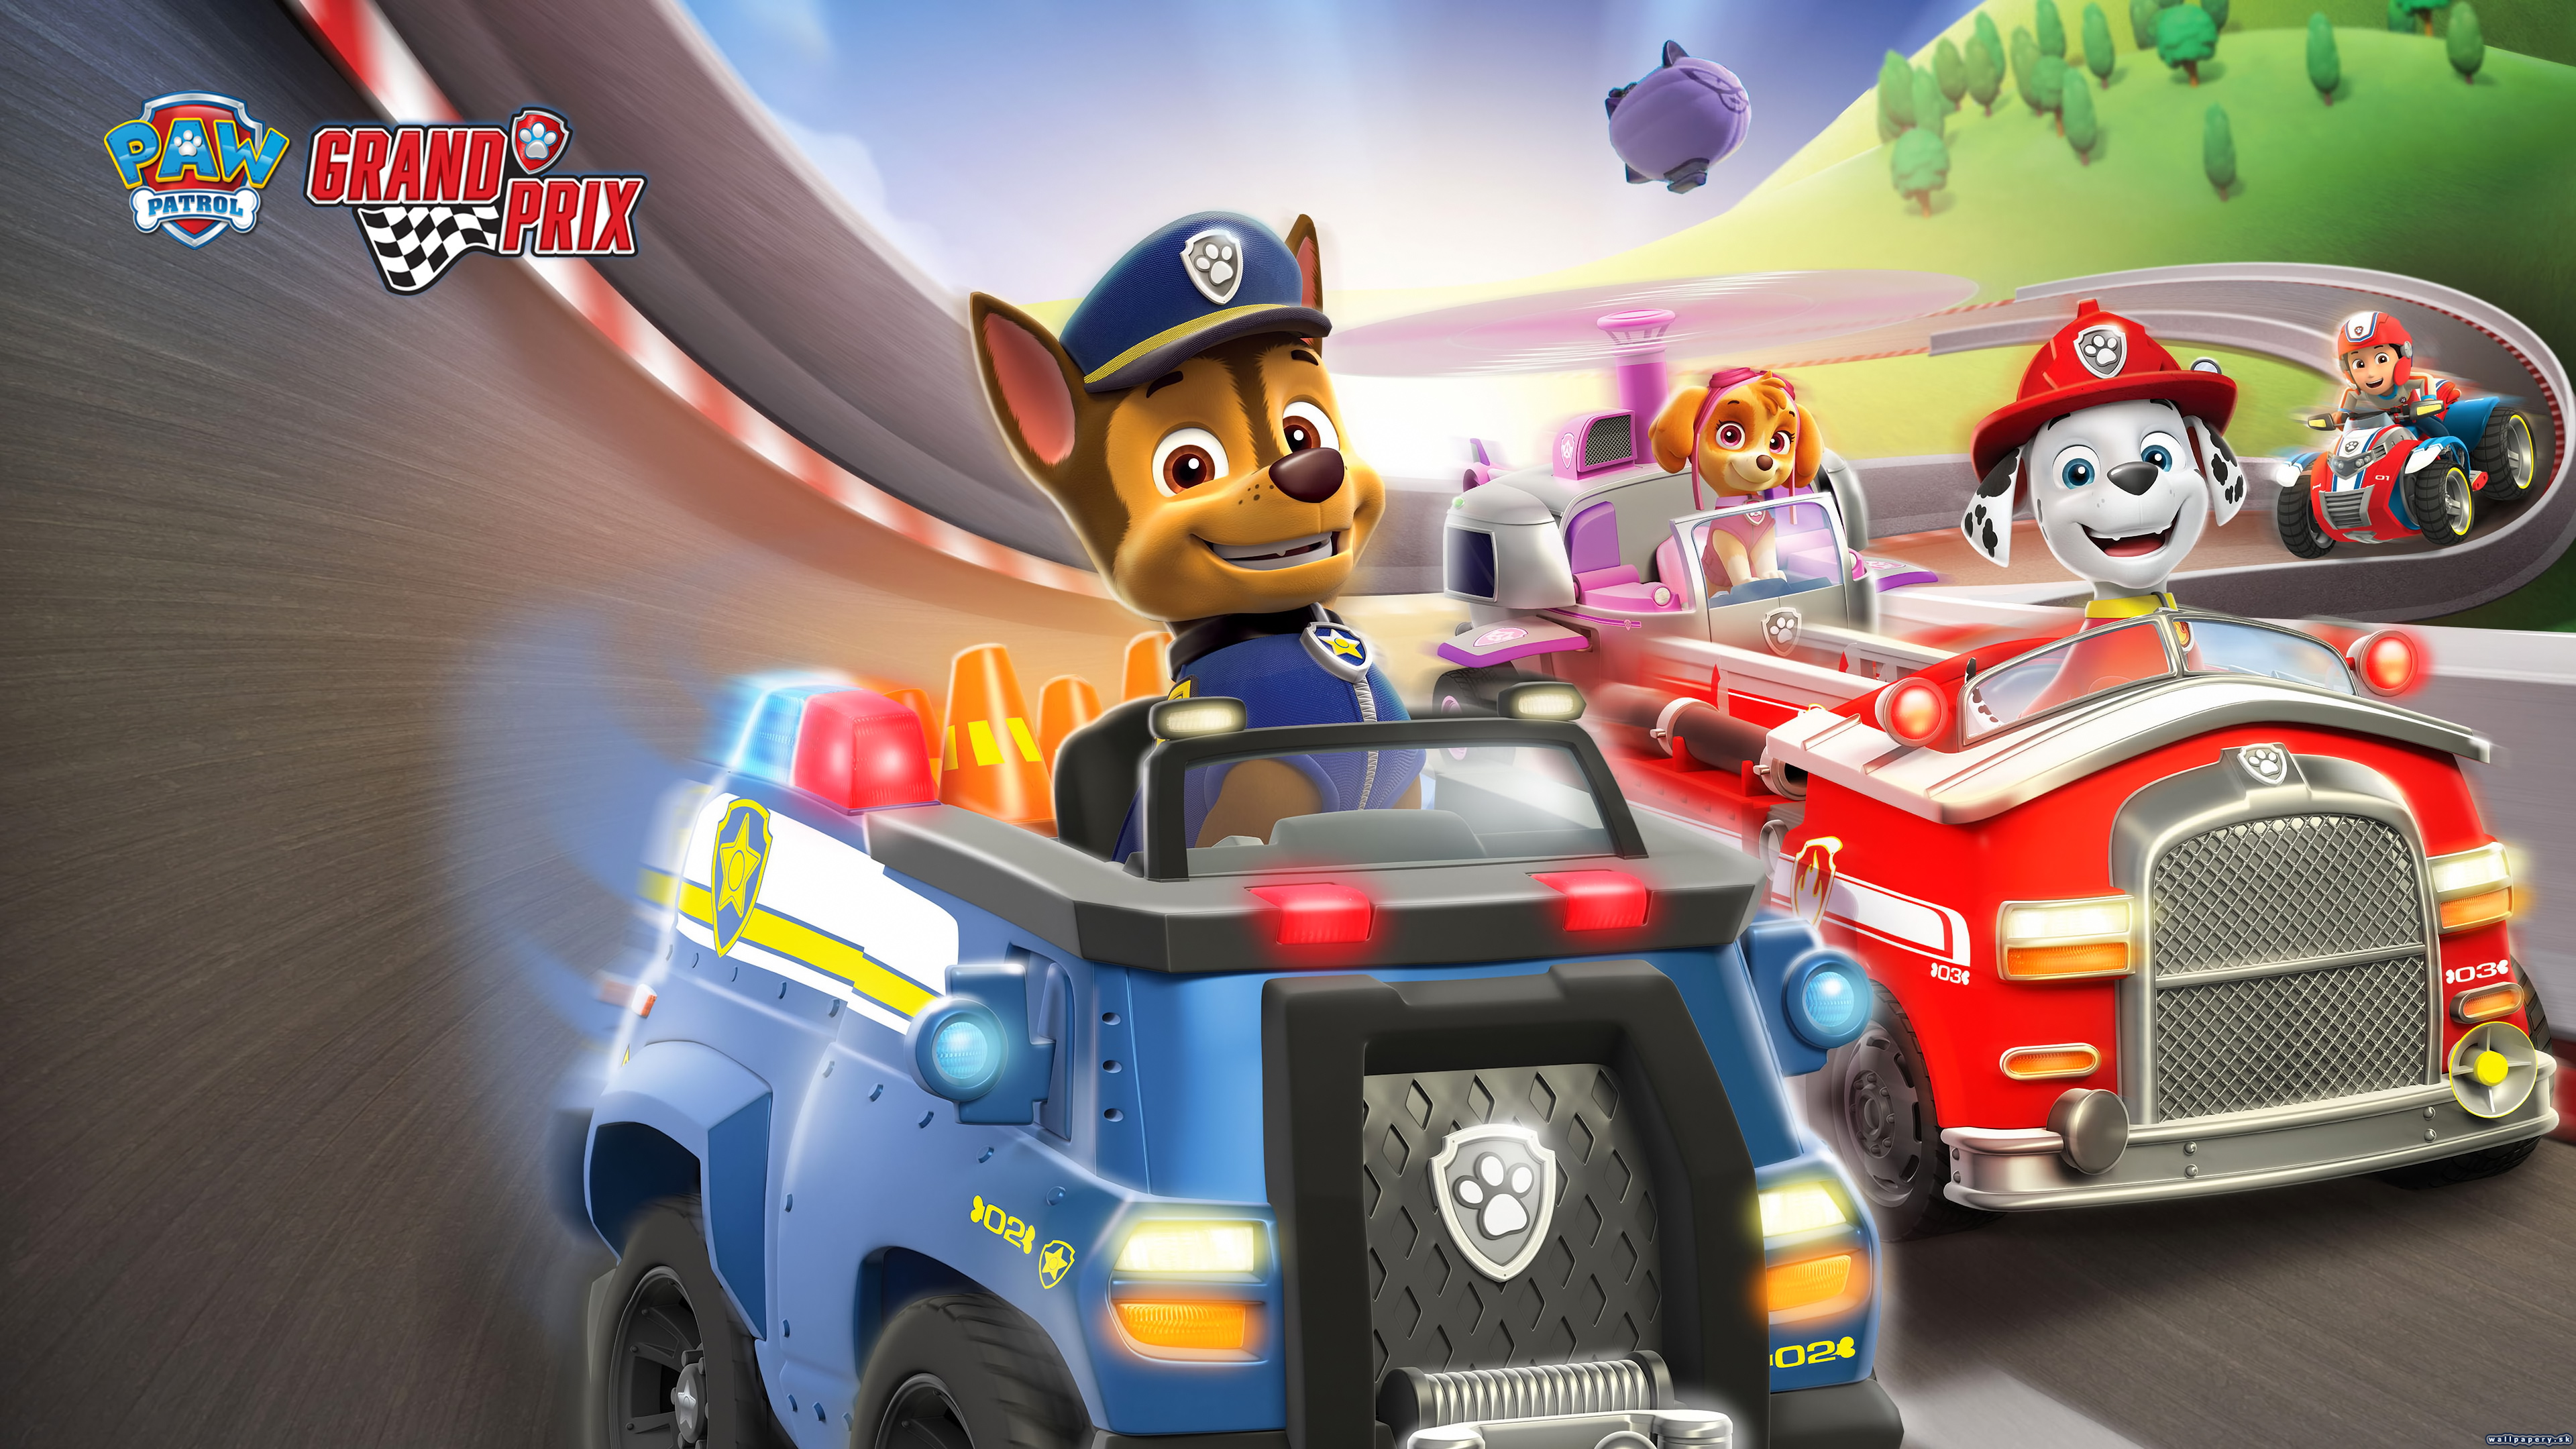 Marshalls Best Animal Rescue Moments and More  PAW Patrol  Cartoons for  Kids  YouTube